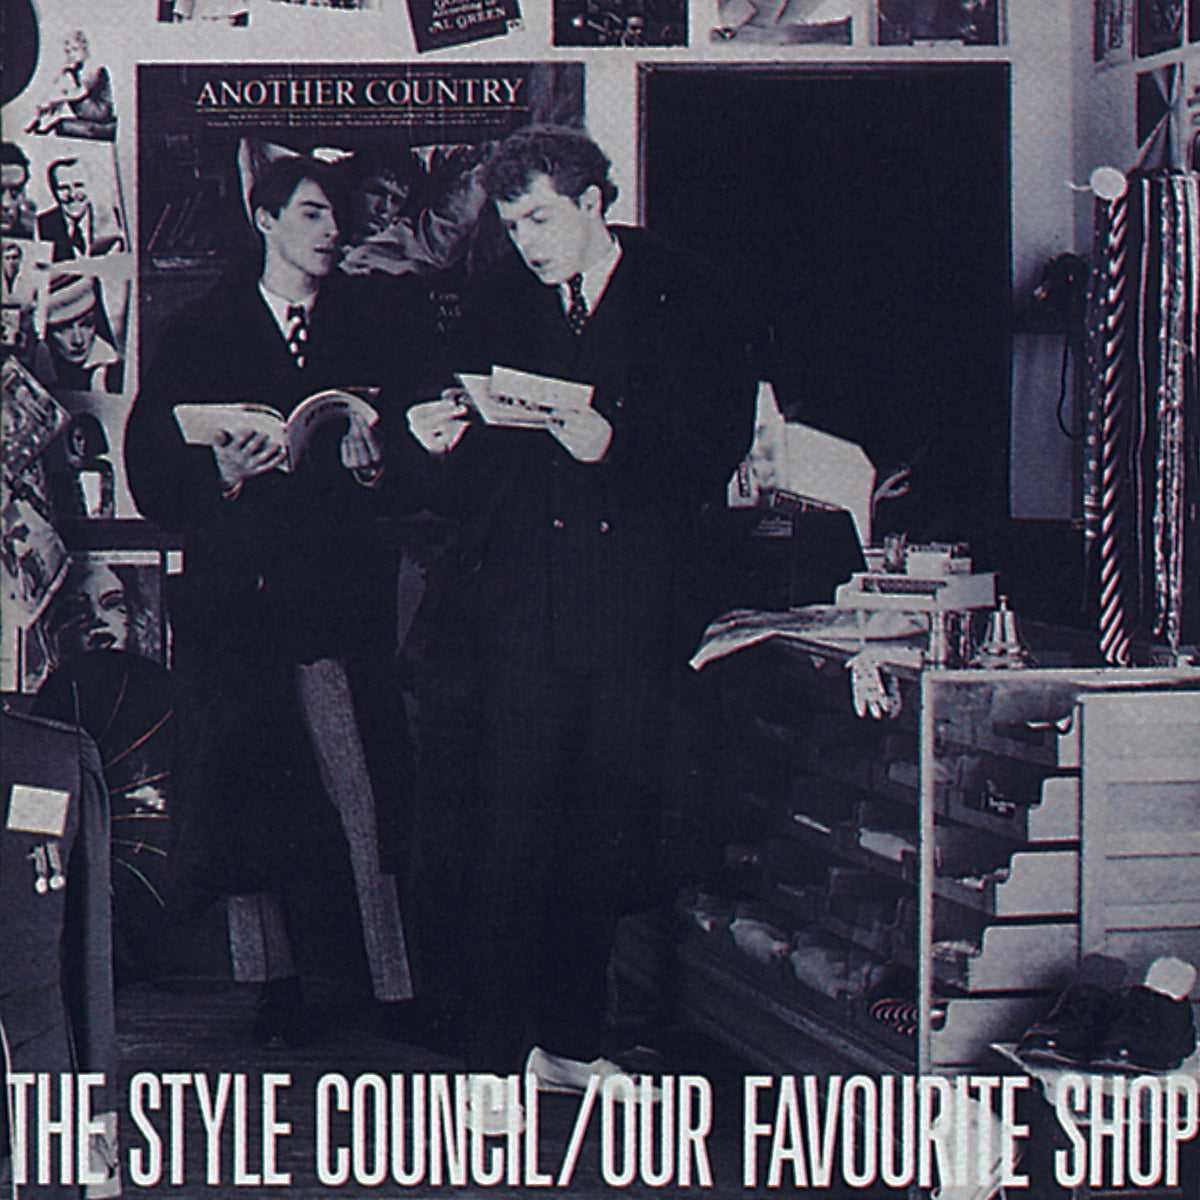 The Style Council - Our Favourite Shop CD